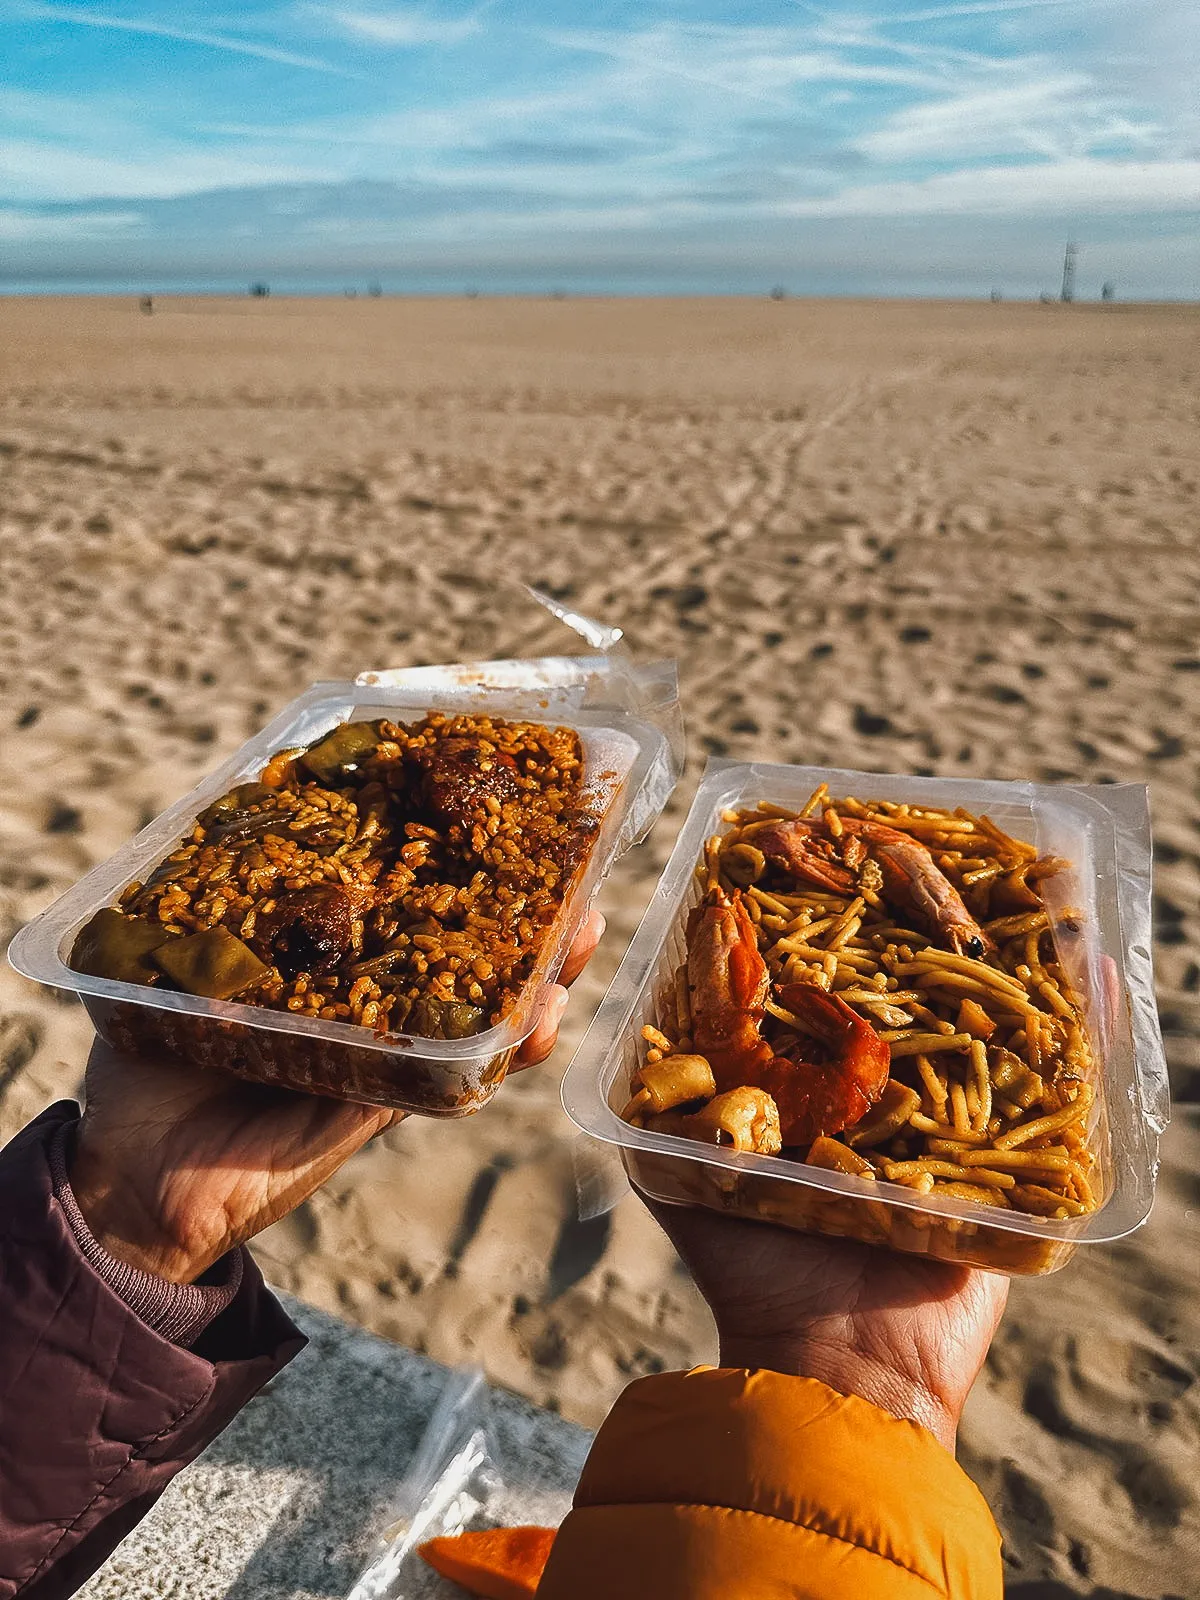 Tubs of paella at the beach in Valencia